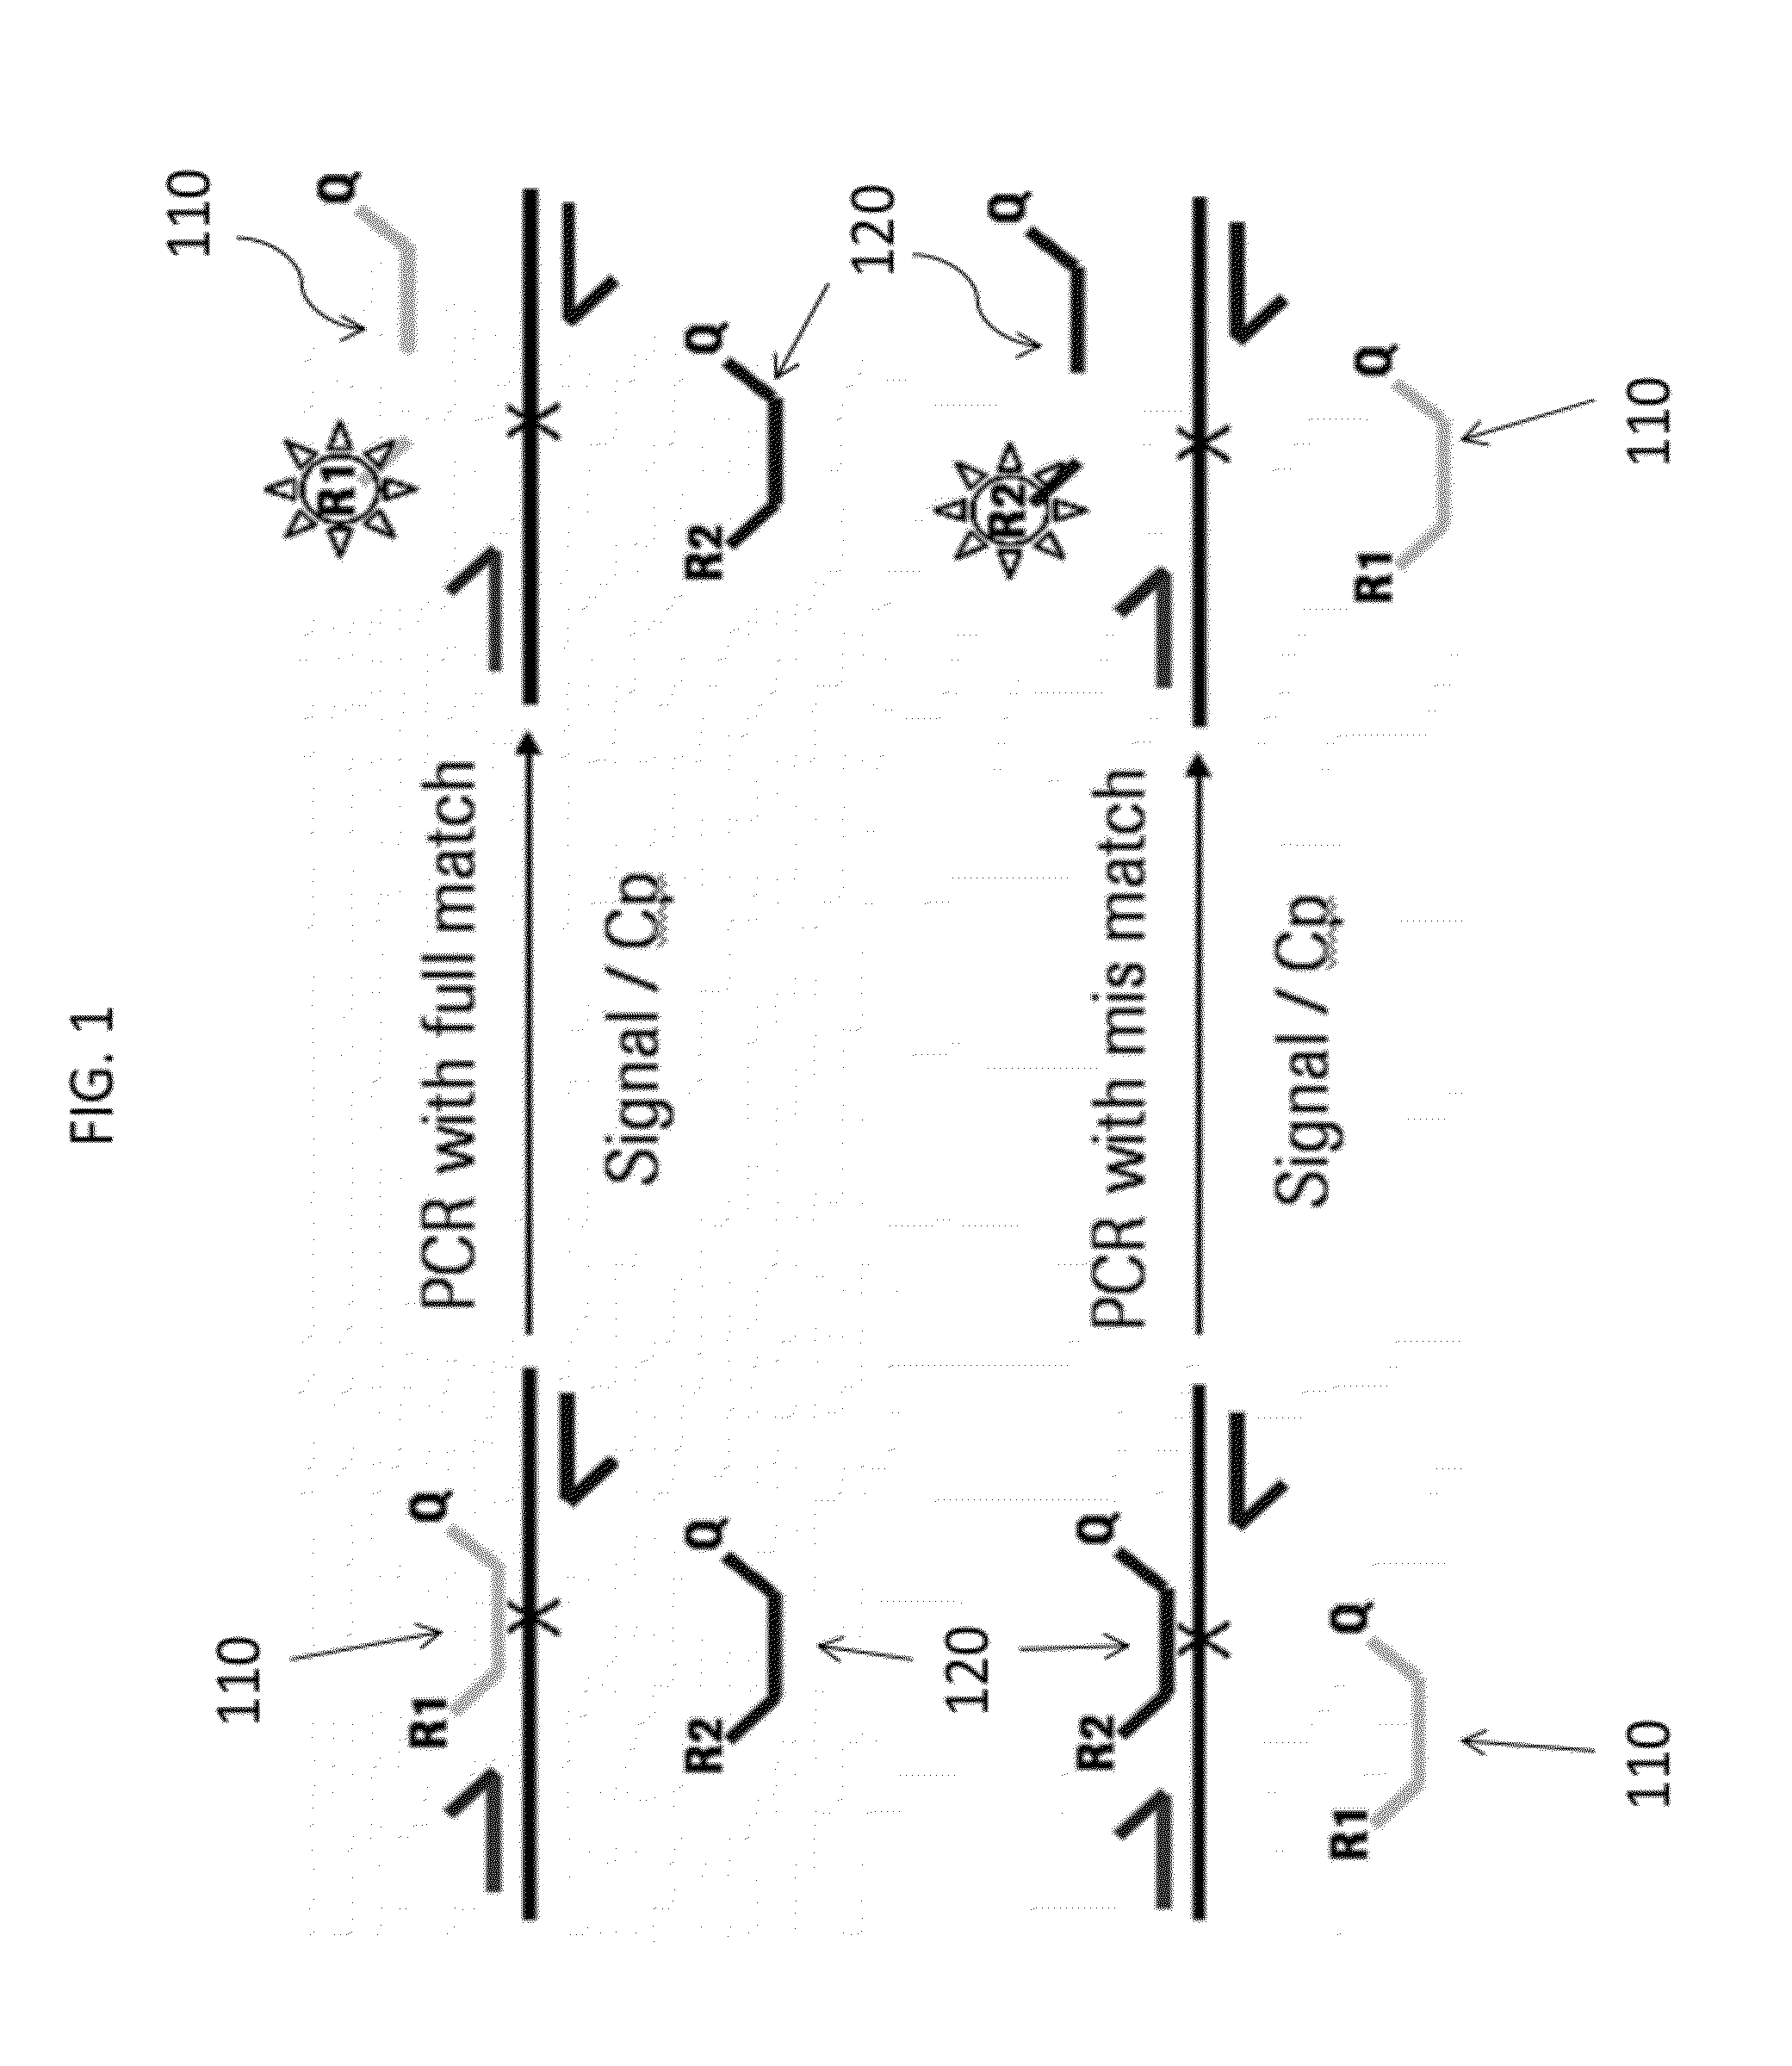 Type of universal probe for the detection of genomic variants